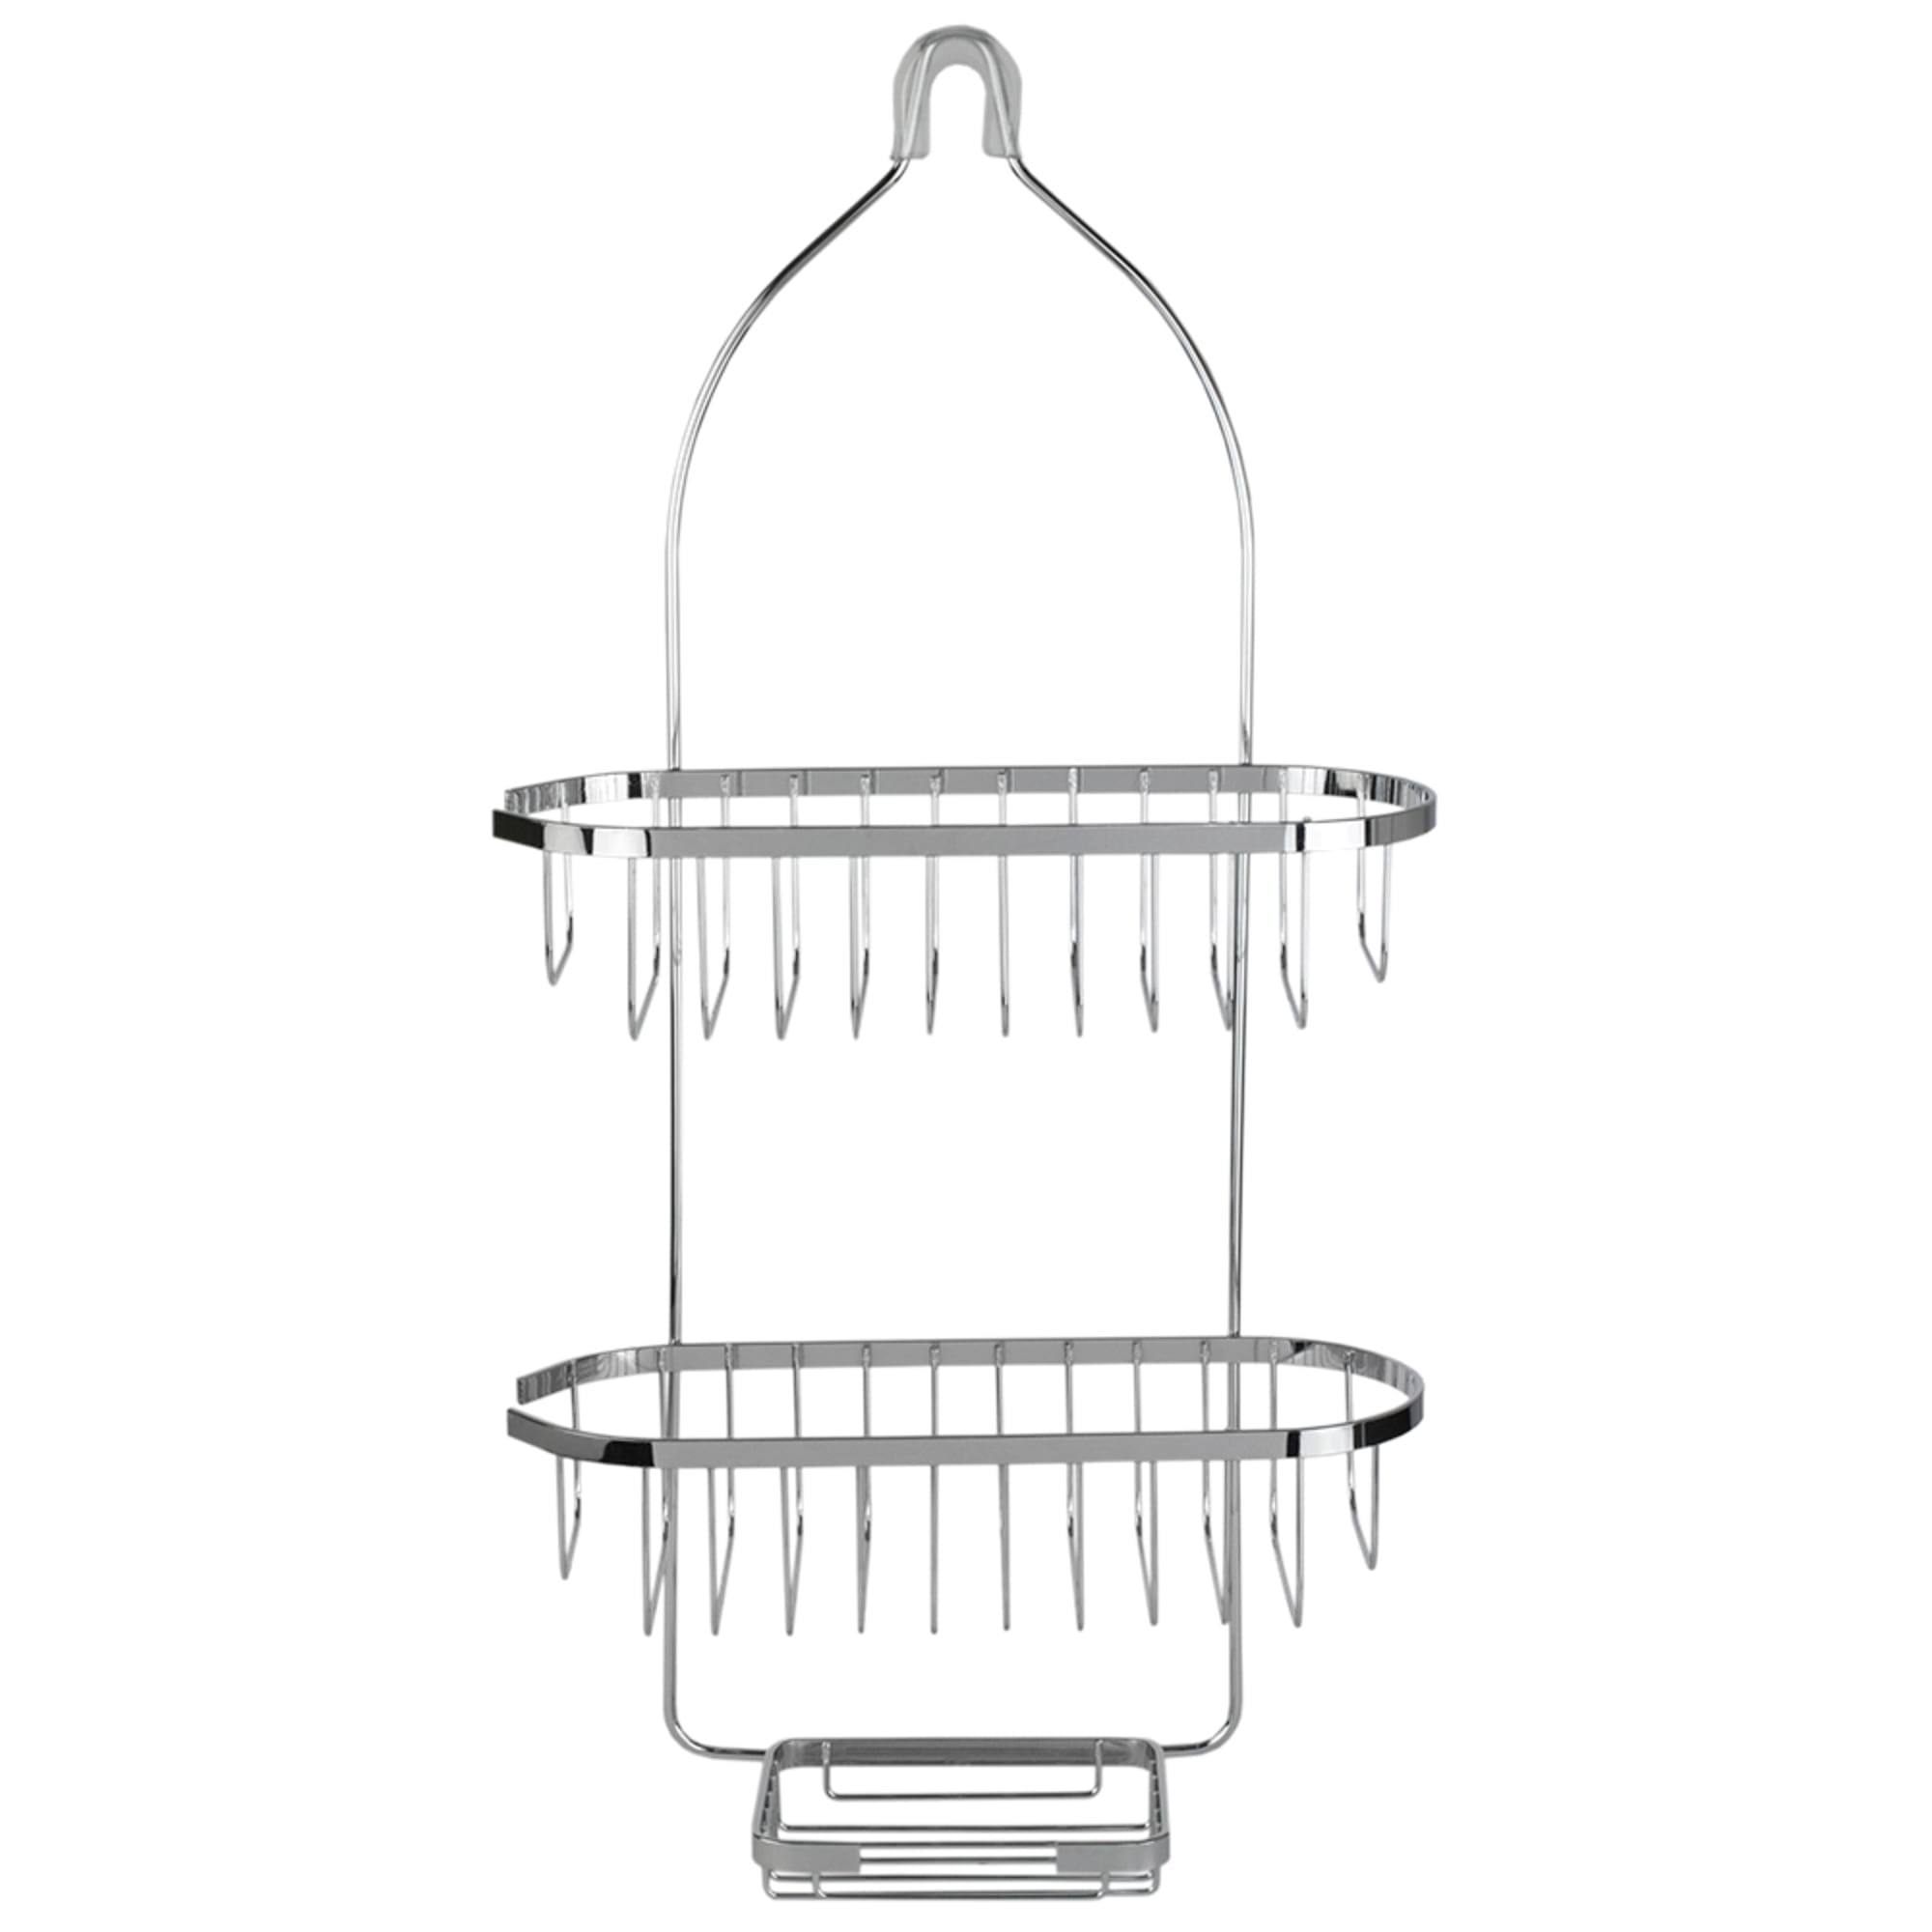 Home Basics Chrome Plated Steel Shower Caddy $10.00 EACH, CASE PACK OF 12